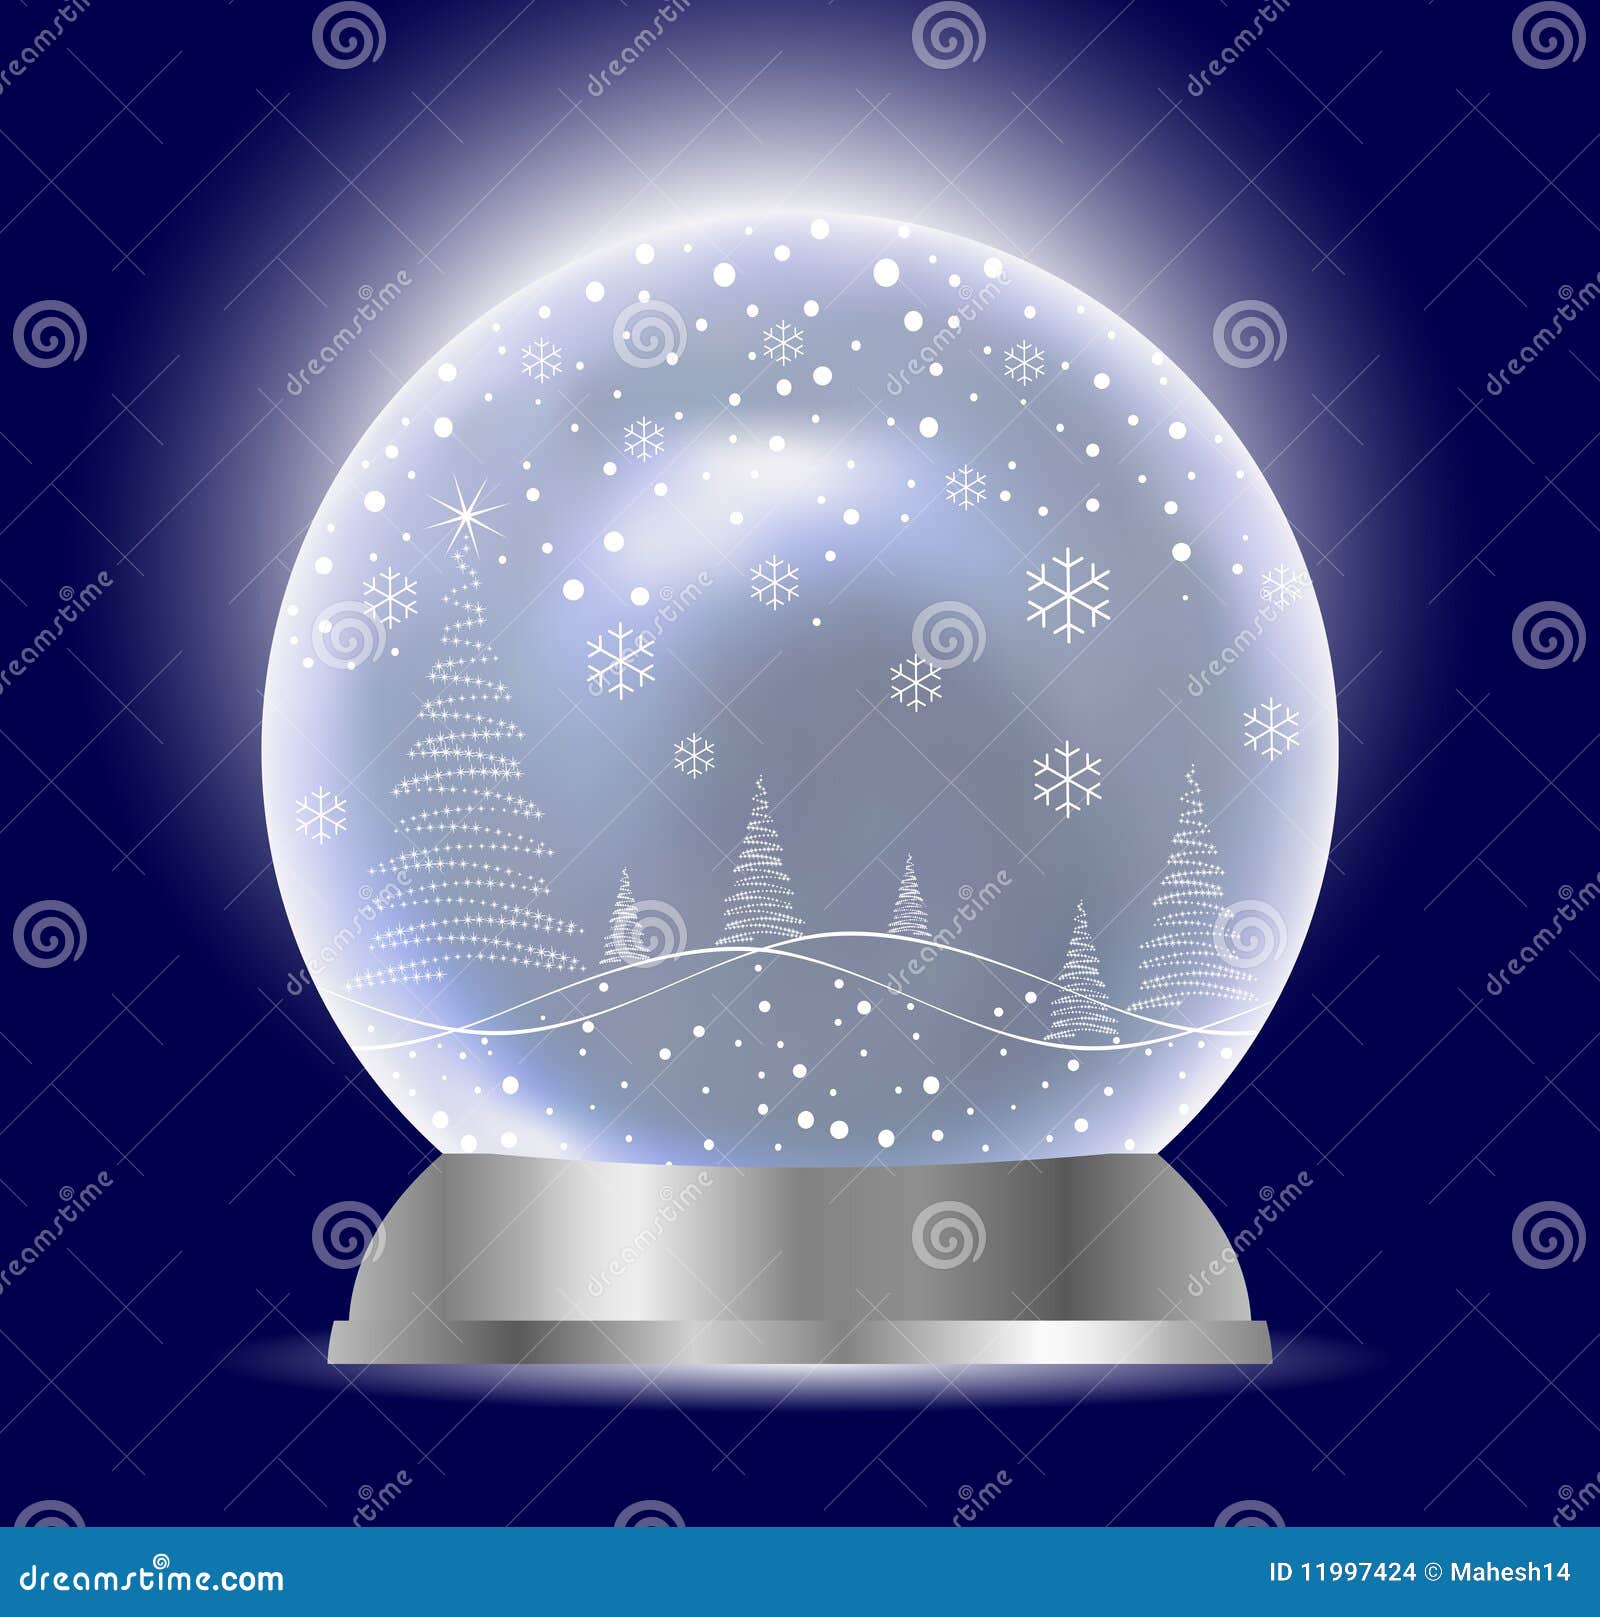 Download Christmas Vector Snow Globe Stock Vector - Illustration of ...